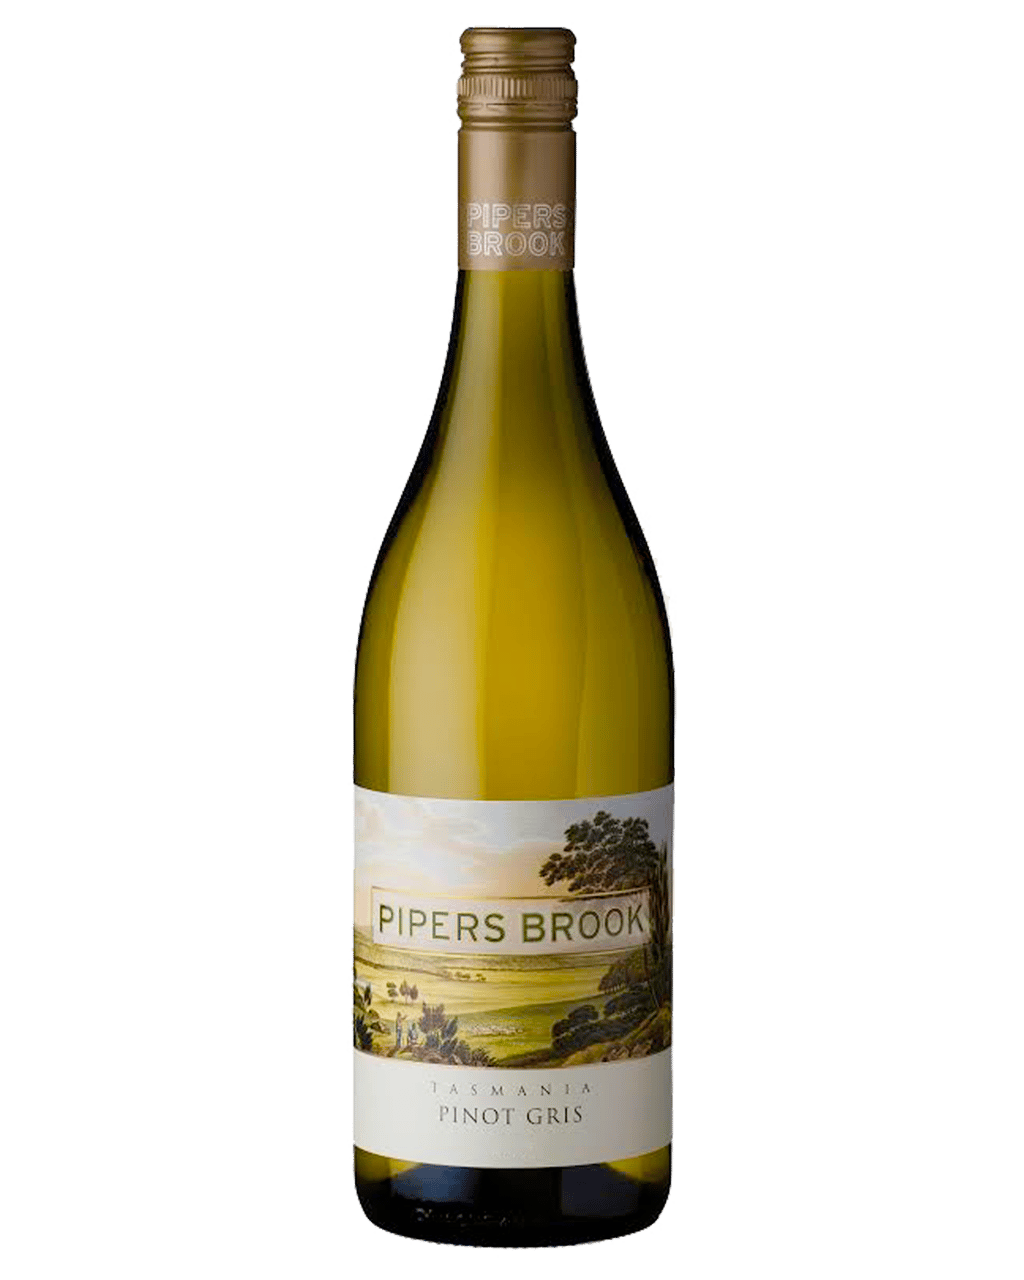 Pipers Brook Pinot Gris Unbeatable Prices Buy Online Best Deals With Delivery Dan Murphys